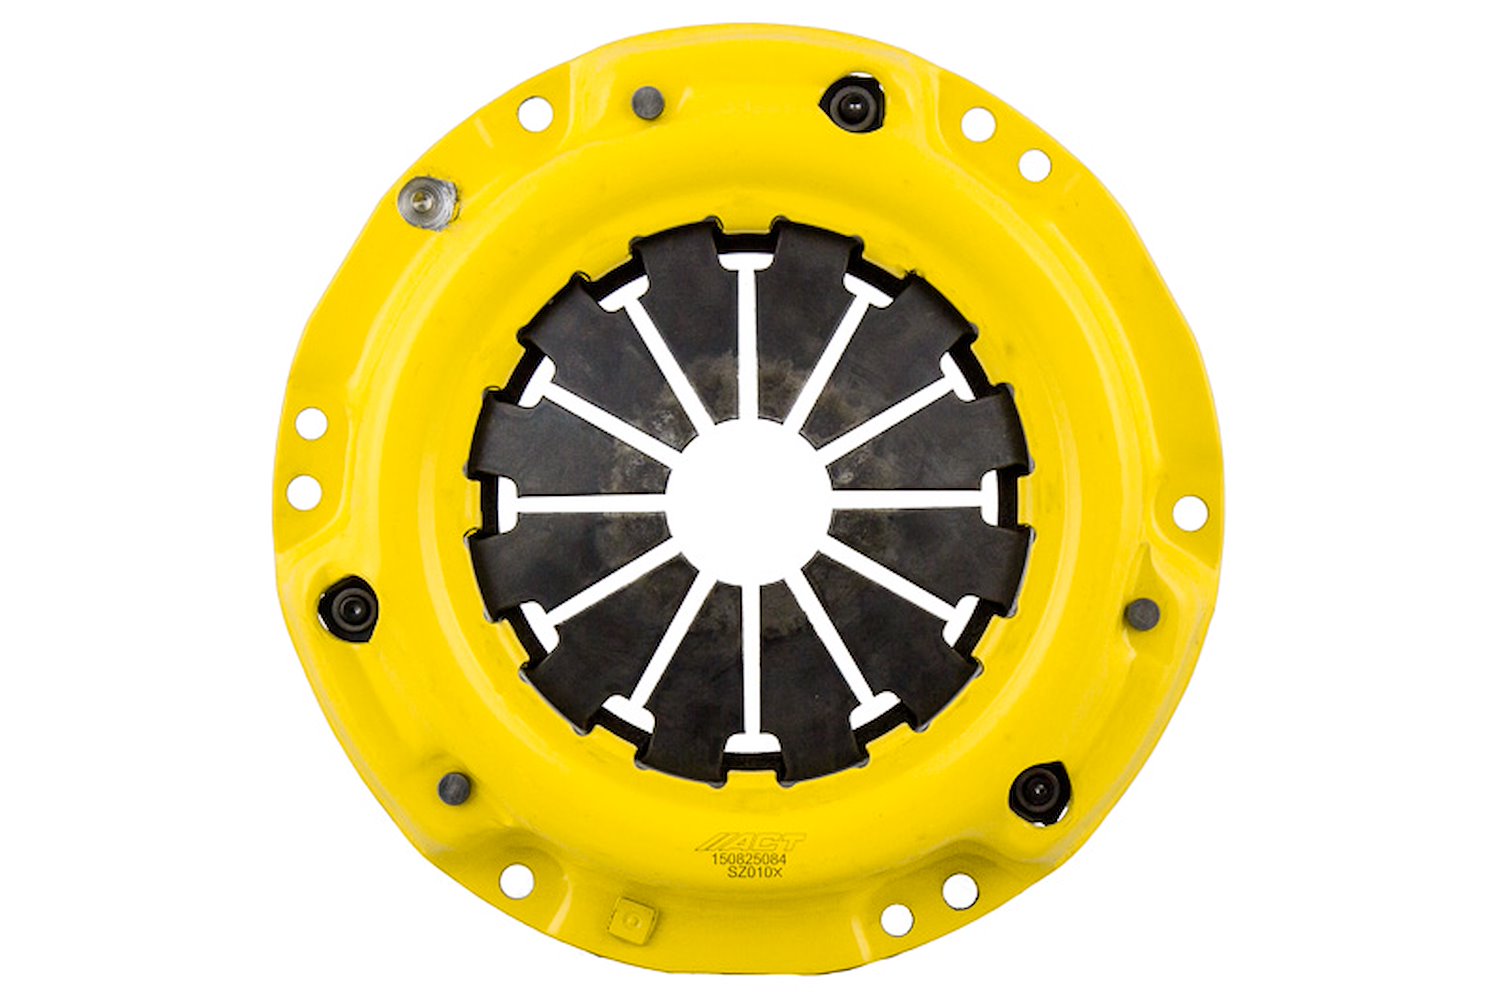 Xtreme Transmission Clutch Pressure Plate Fits Select GM